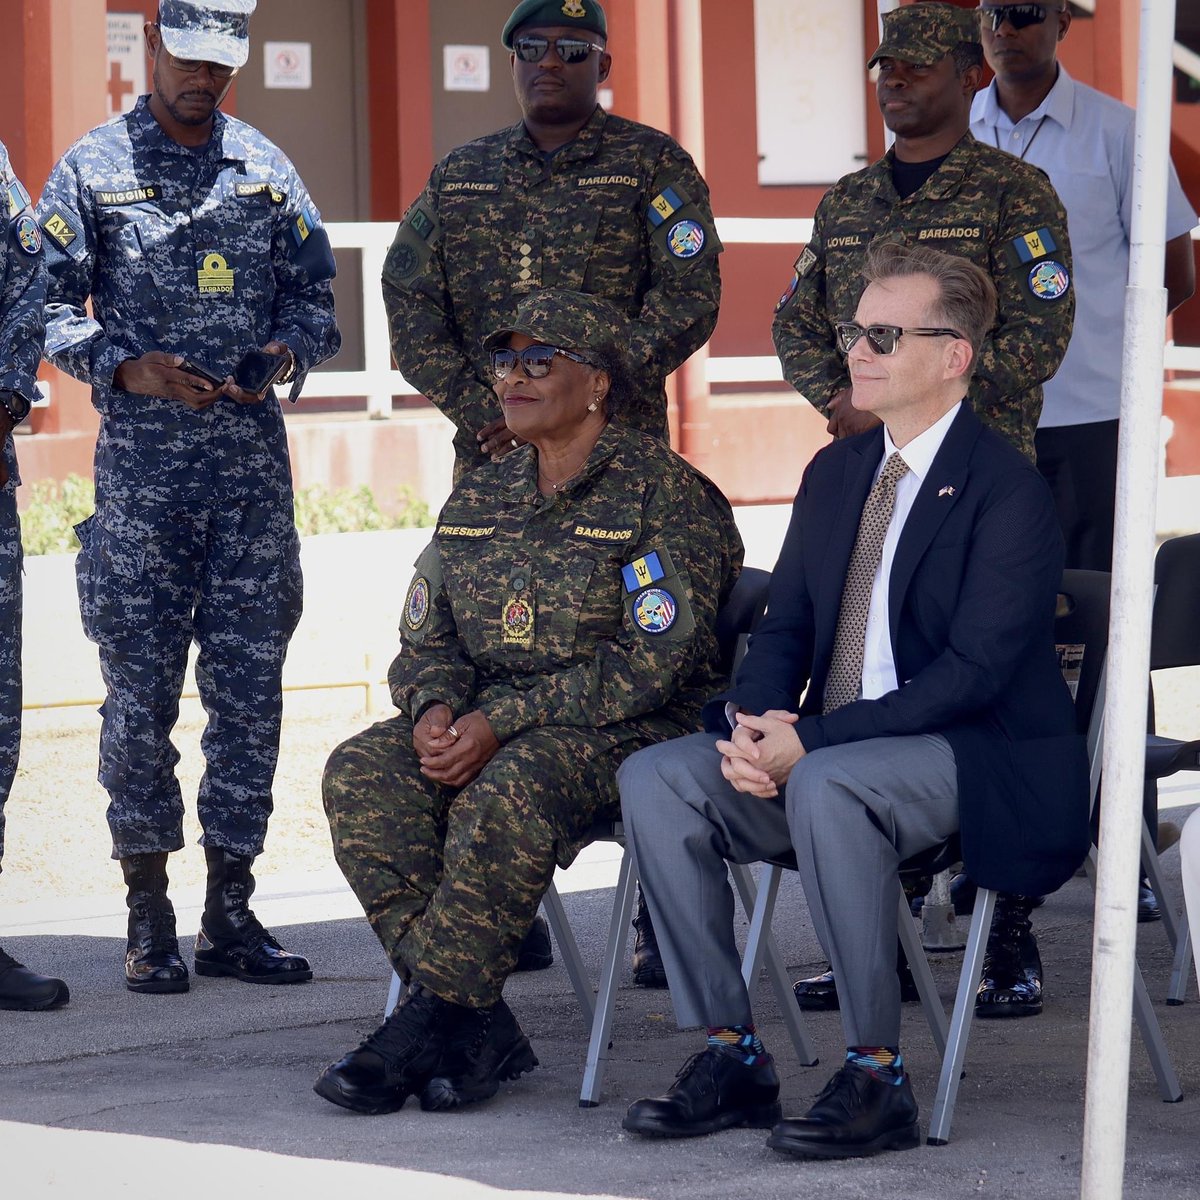 The President of Barbados and Commander in Chief of the Barbados Defence Force, Her Excellency, The Most Honourable, Dame Sandra Mason, joined the training and experience of Exercise TRADEWINDS 2024. Her Excellency was joined by US Ambassador to Barbados, His Excellency Roger